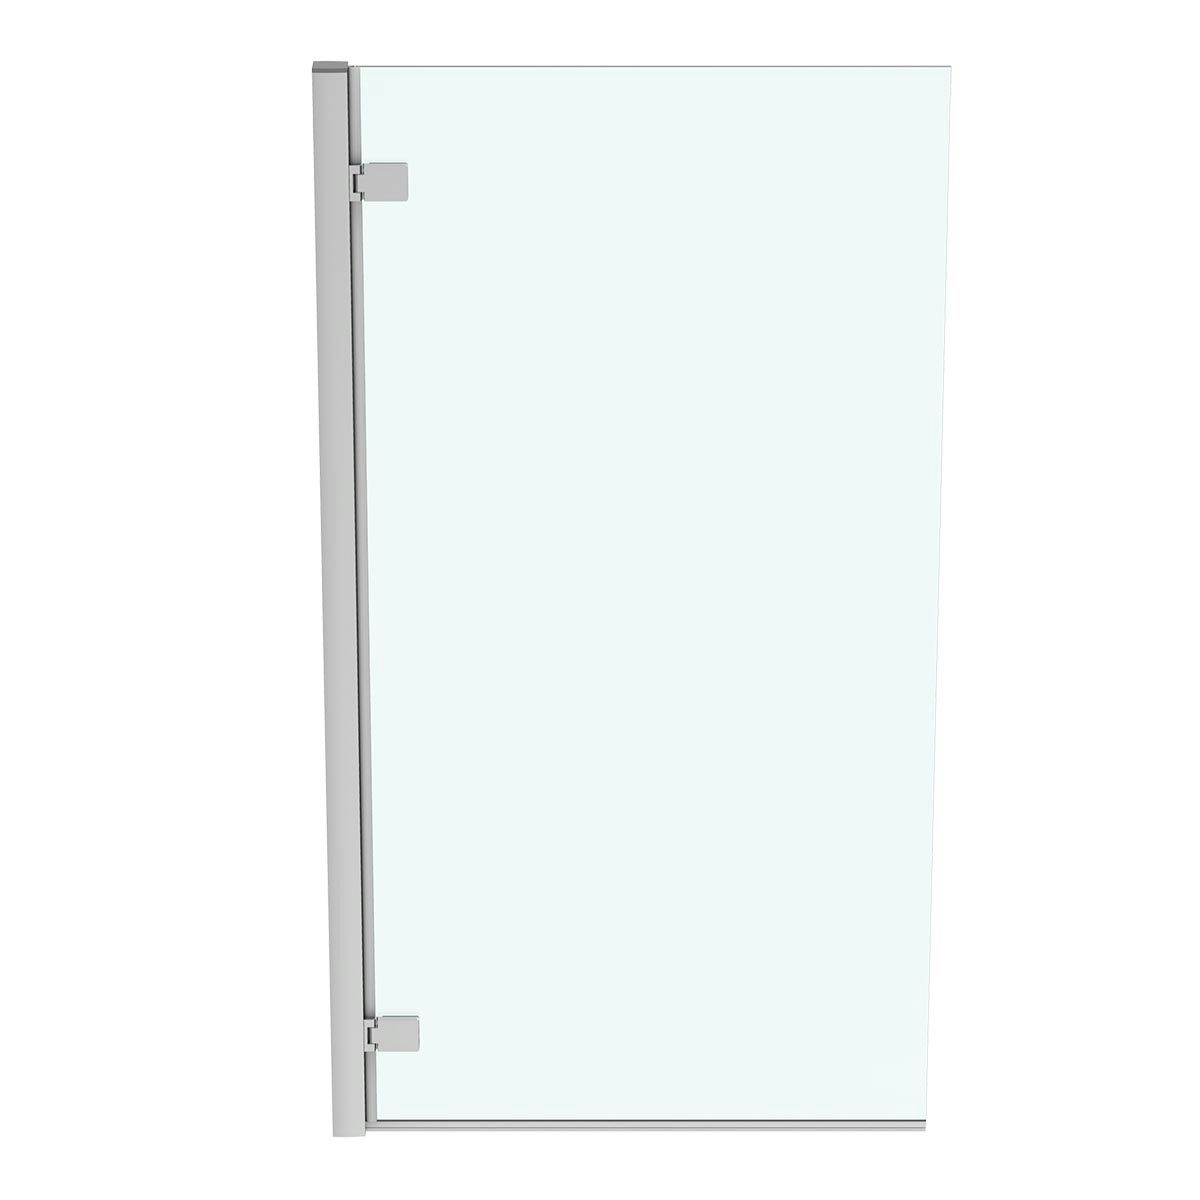 Ideal Standard i.life left hand hinged angle bathscreen with Idealclean clear glass in bright silver